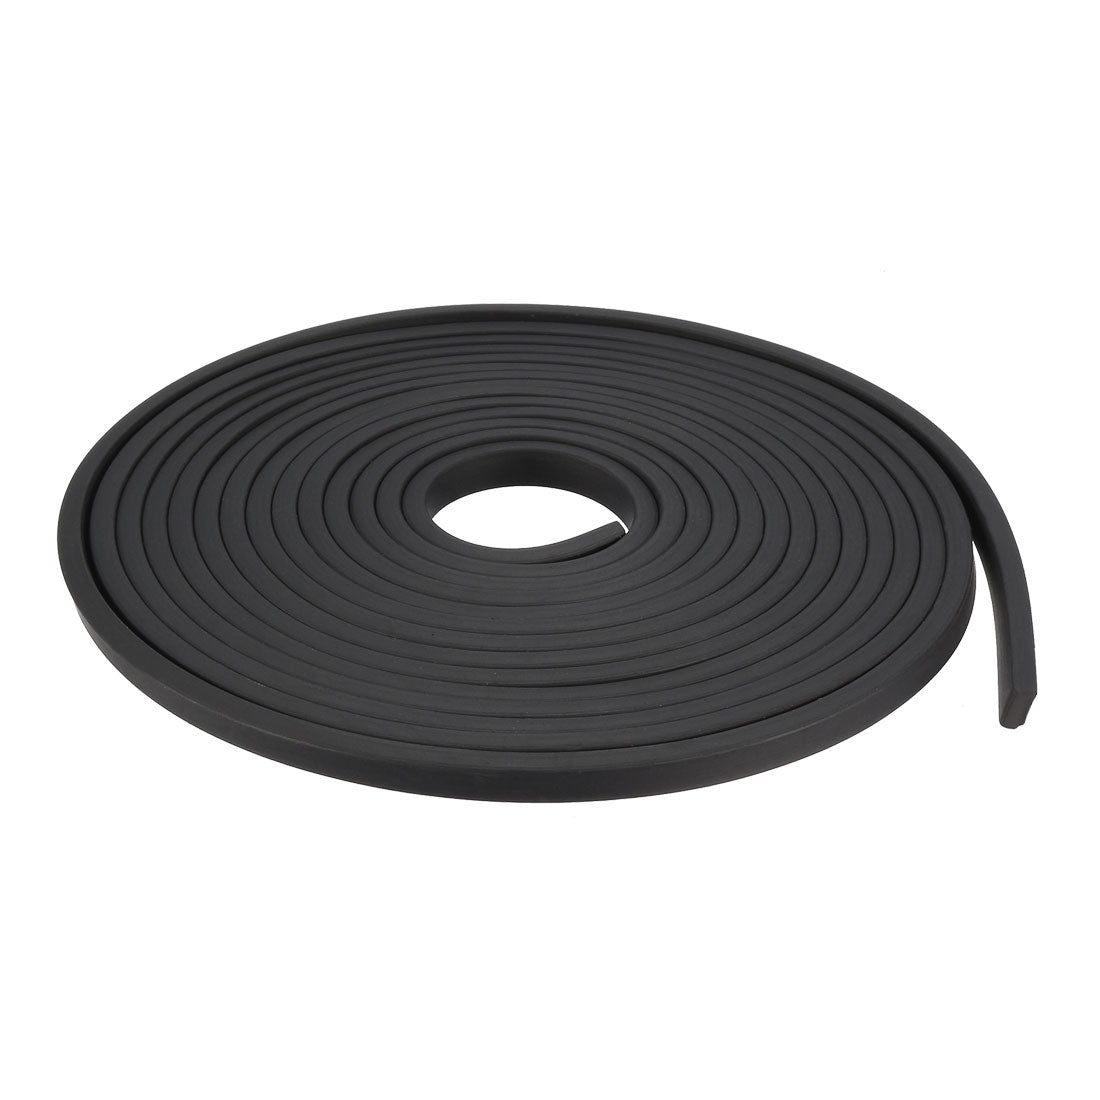 uxcell Uxcell Solid Rectangle Rubber Seal Strip 5mm Wide 3mm Thick, 3 Meters Long Black